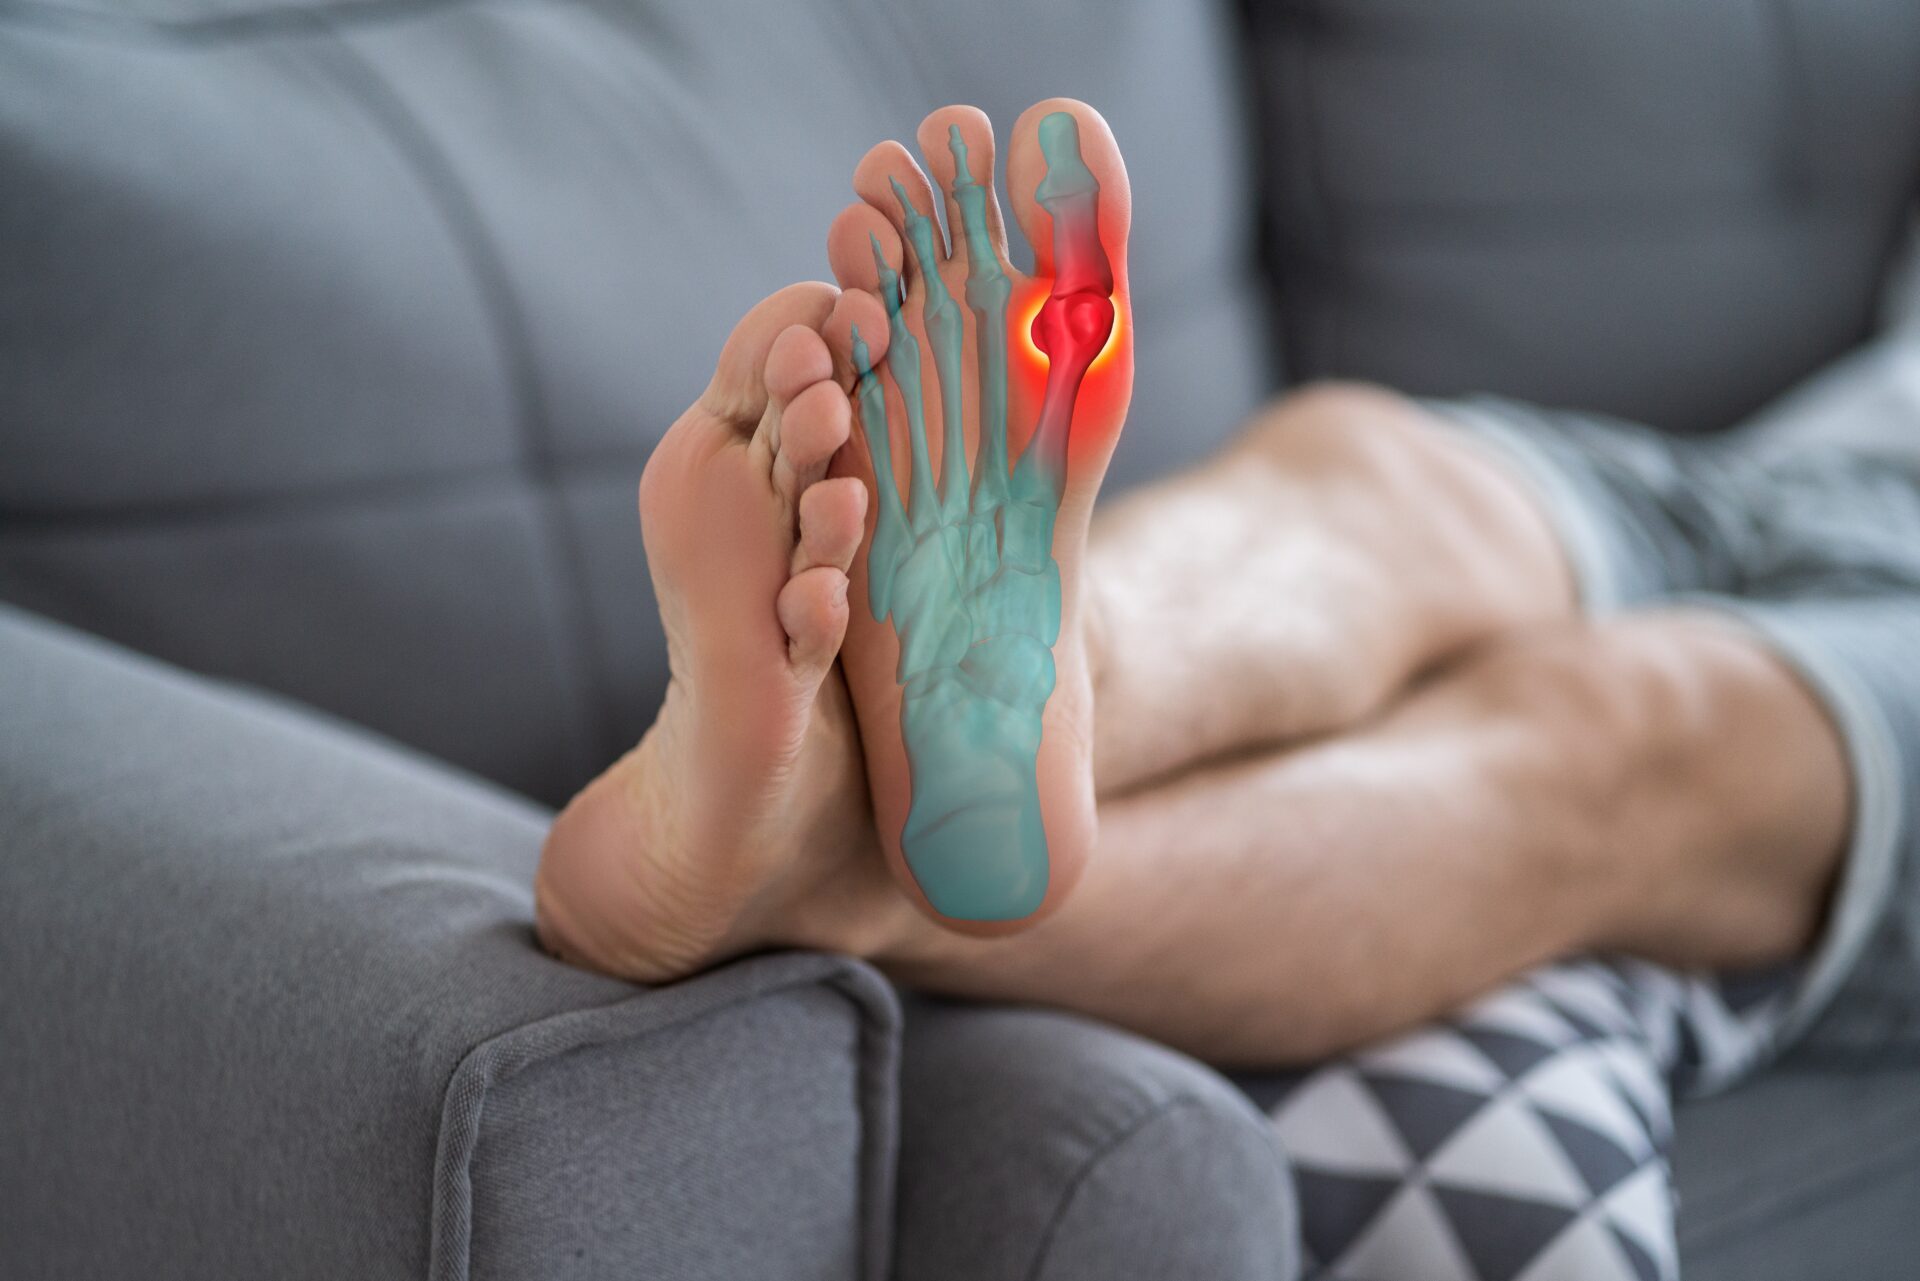 Person is sitting on a couch with their legs crossed. The tendons and joints of one foot are clearly visible. The big toe joint is colored red.